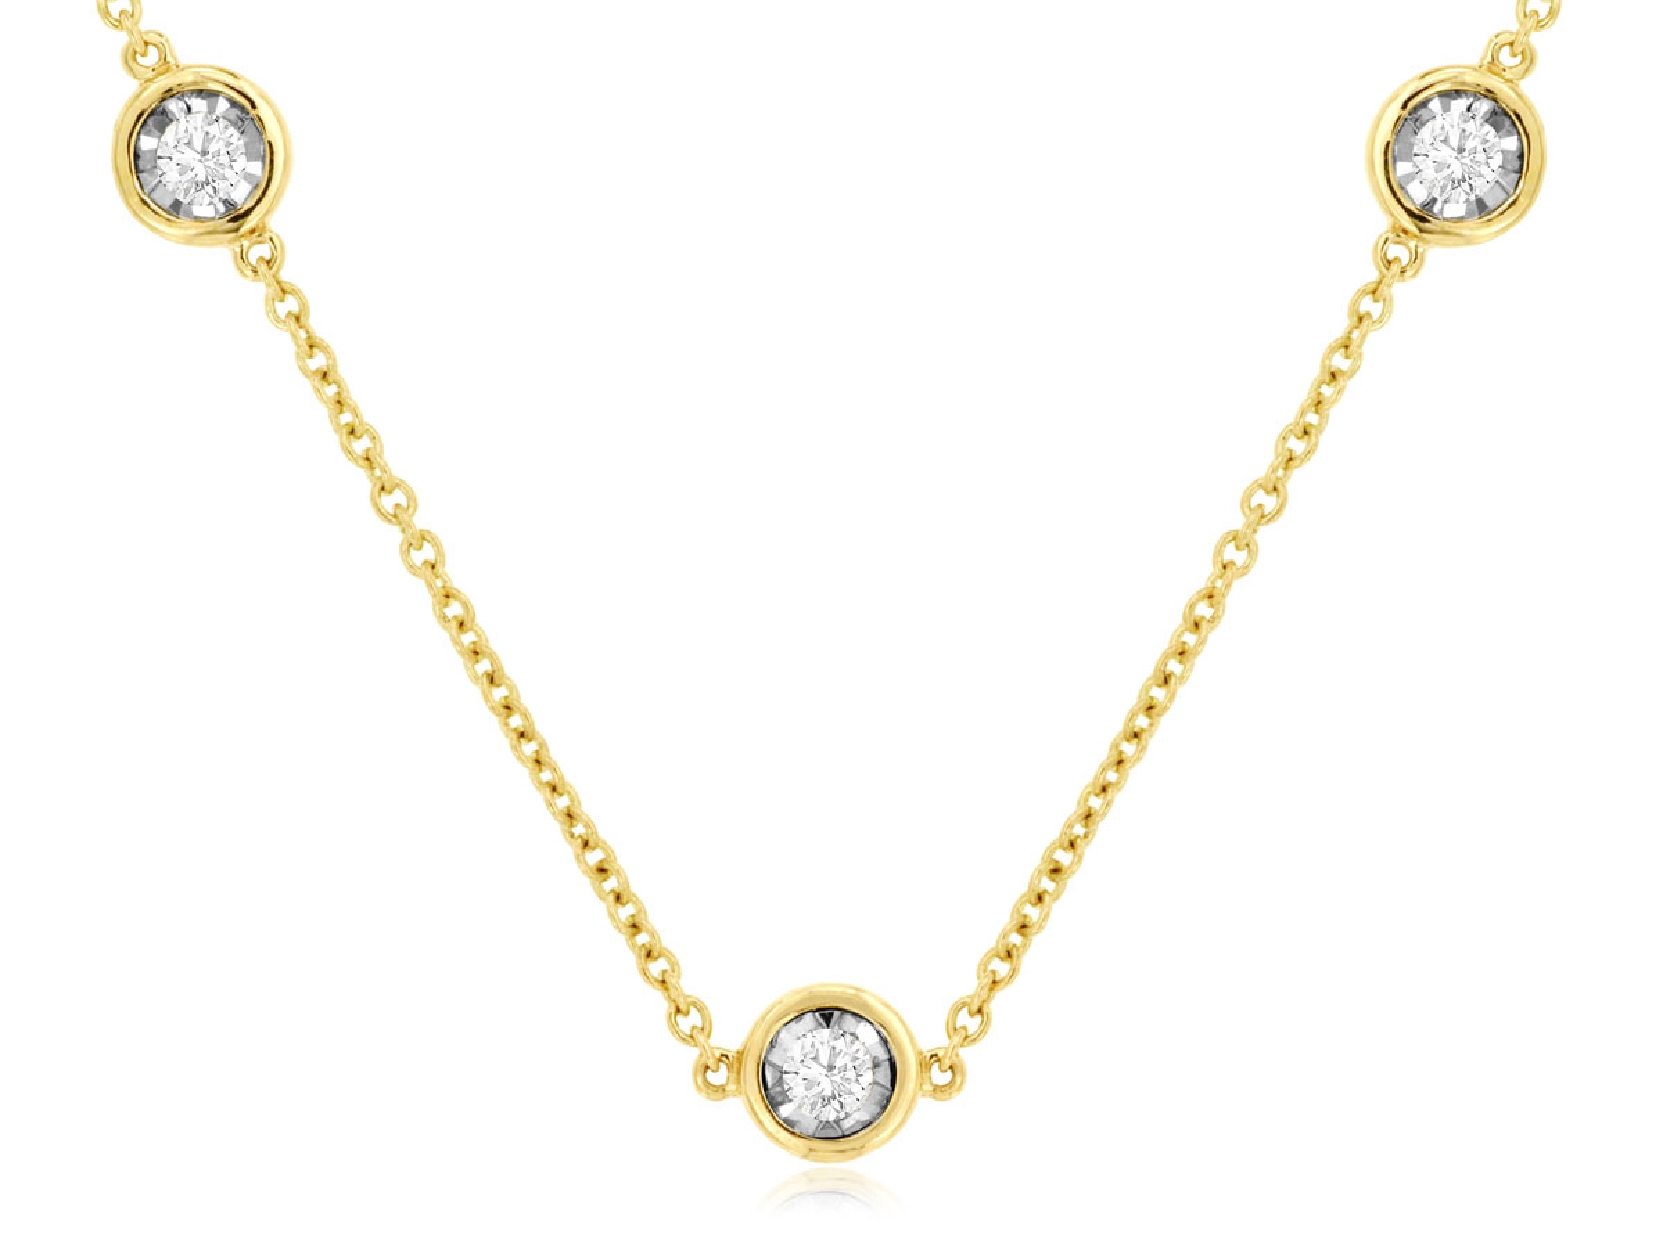 14K Yellow Gold Diamond Station Necklace
0.50ct

18 Inches 